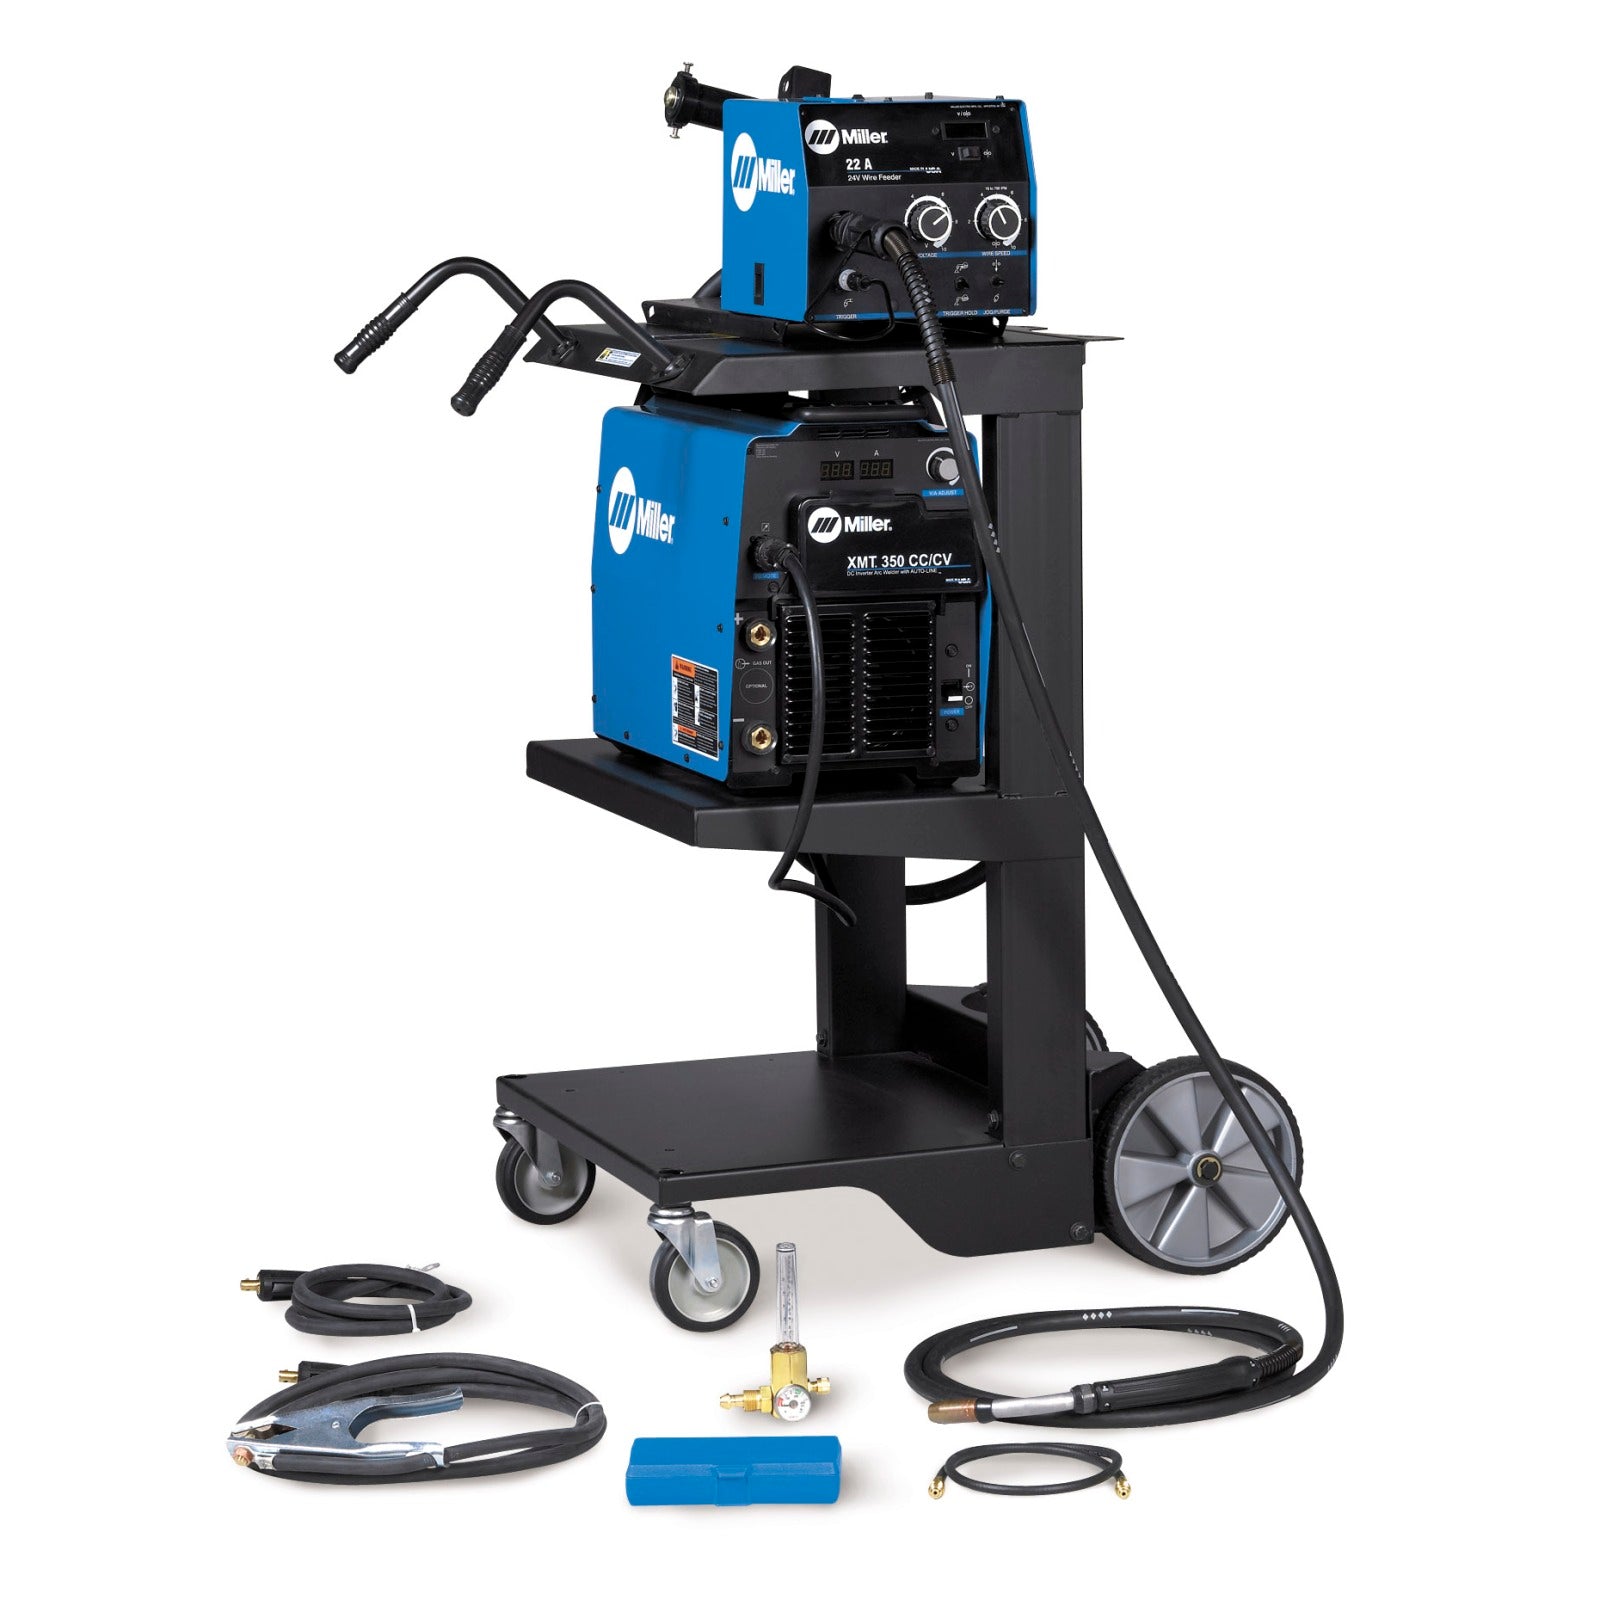 Miller XMT 350 CC/CV Multiprocess Welder with Feeder, Accessory Package, and Cart (951327)